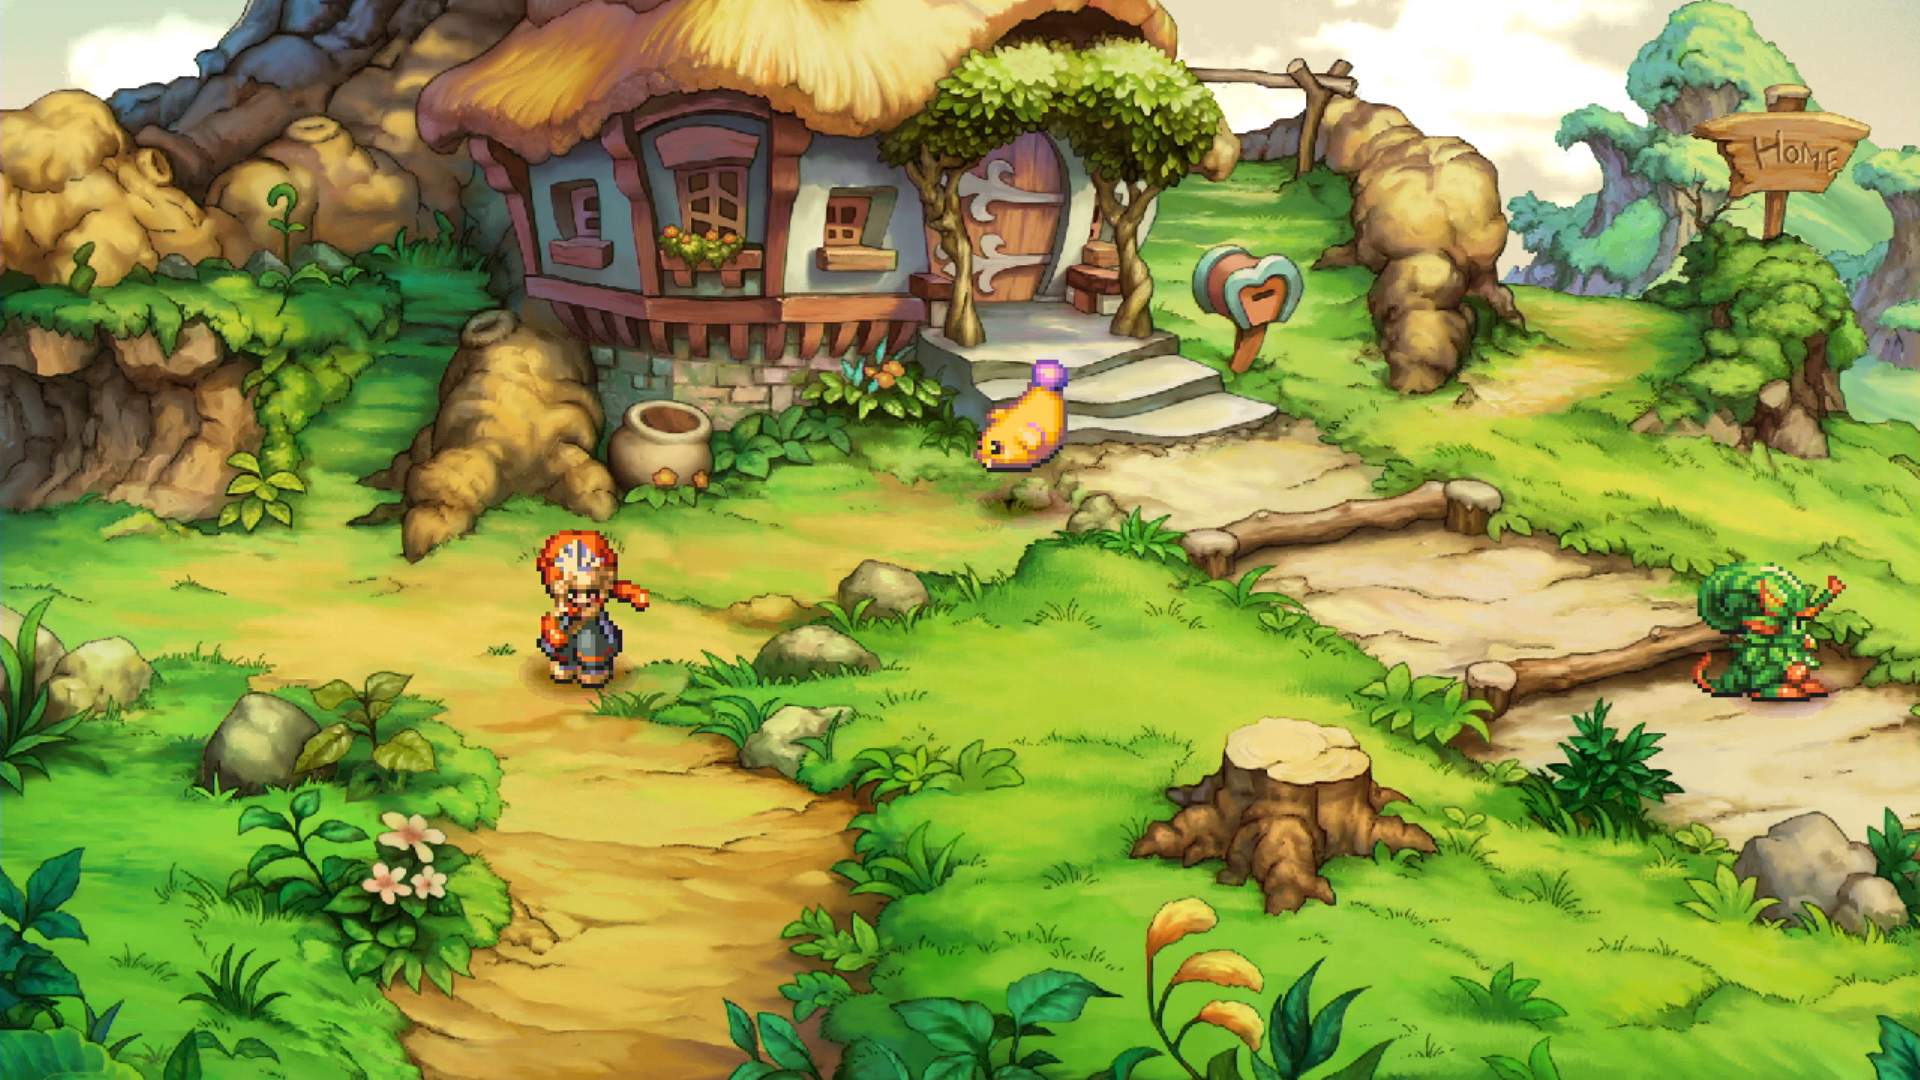 Legend of Mana HERO leaves home and is walking down a path